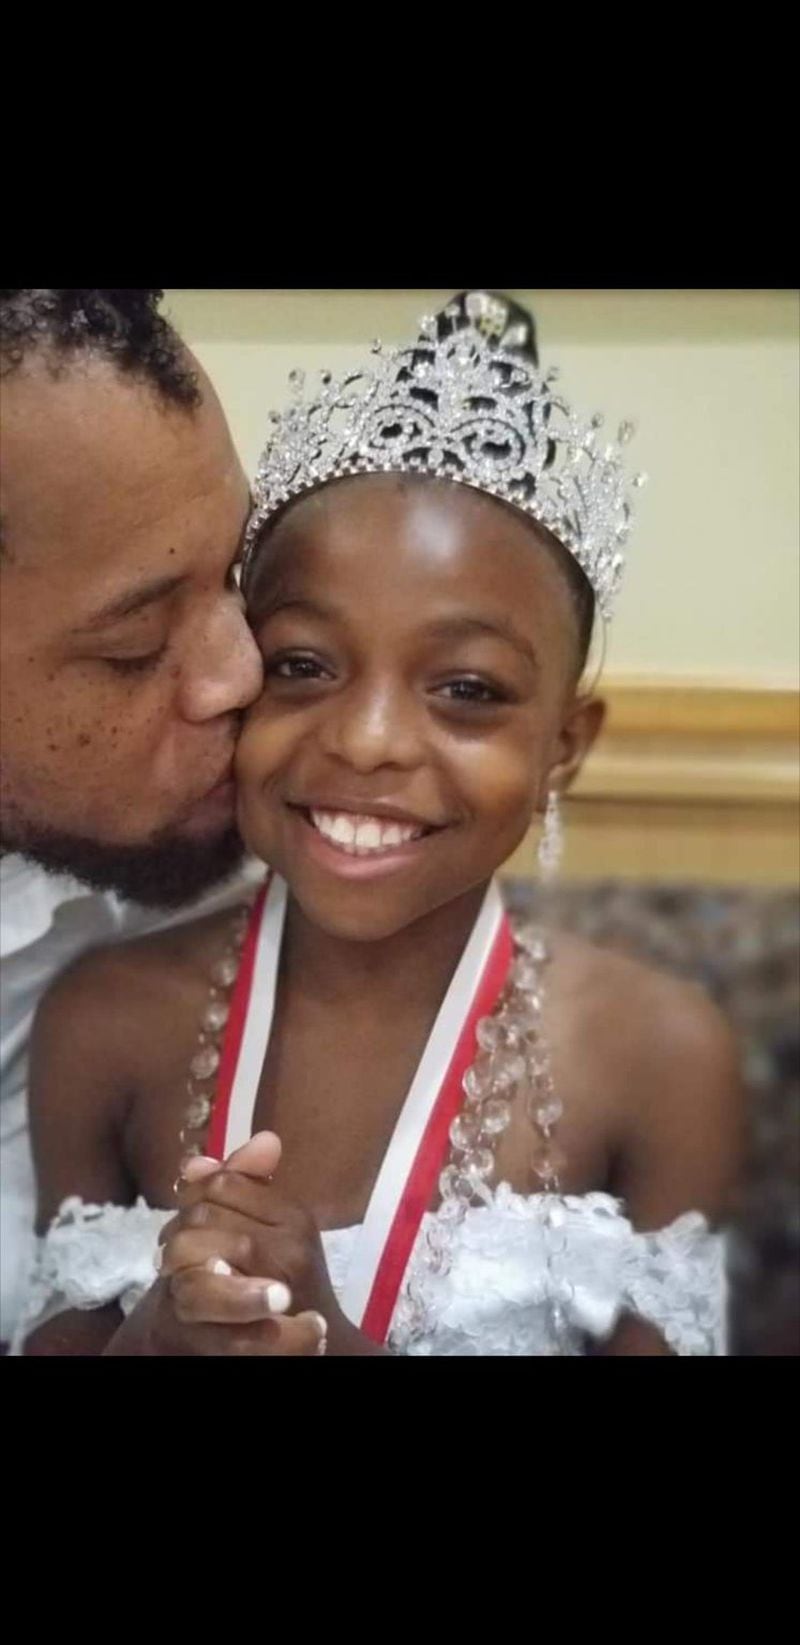 After years of legal wrangling, Brian Jackson was recently awarded joint custody of his daughter, 11-year-old Ambrianna. CONTRIBUTED